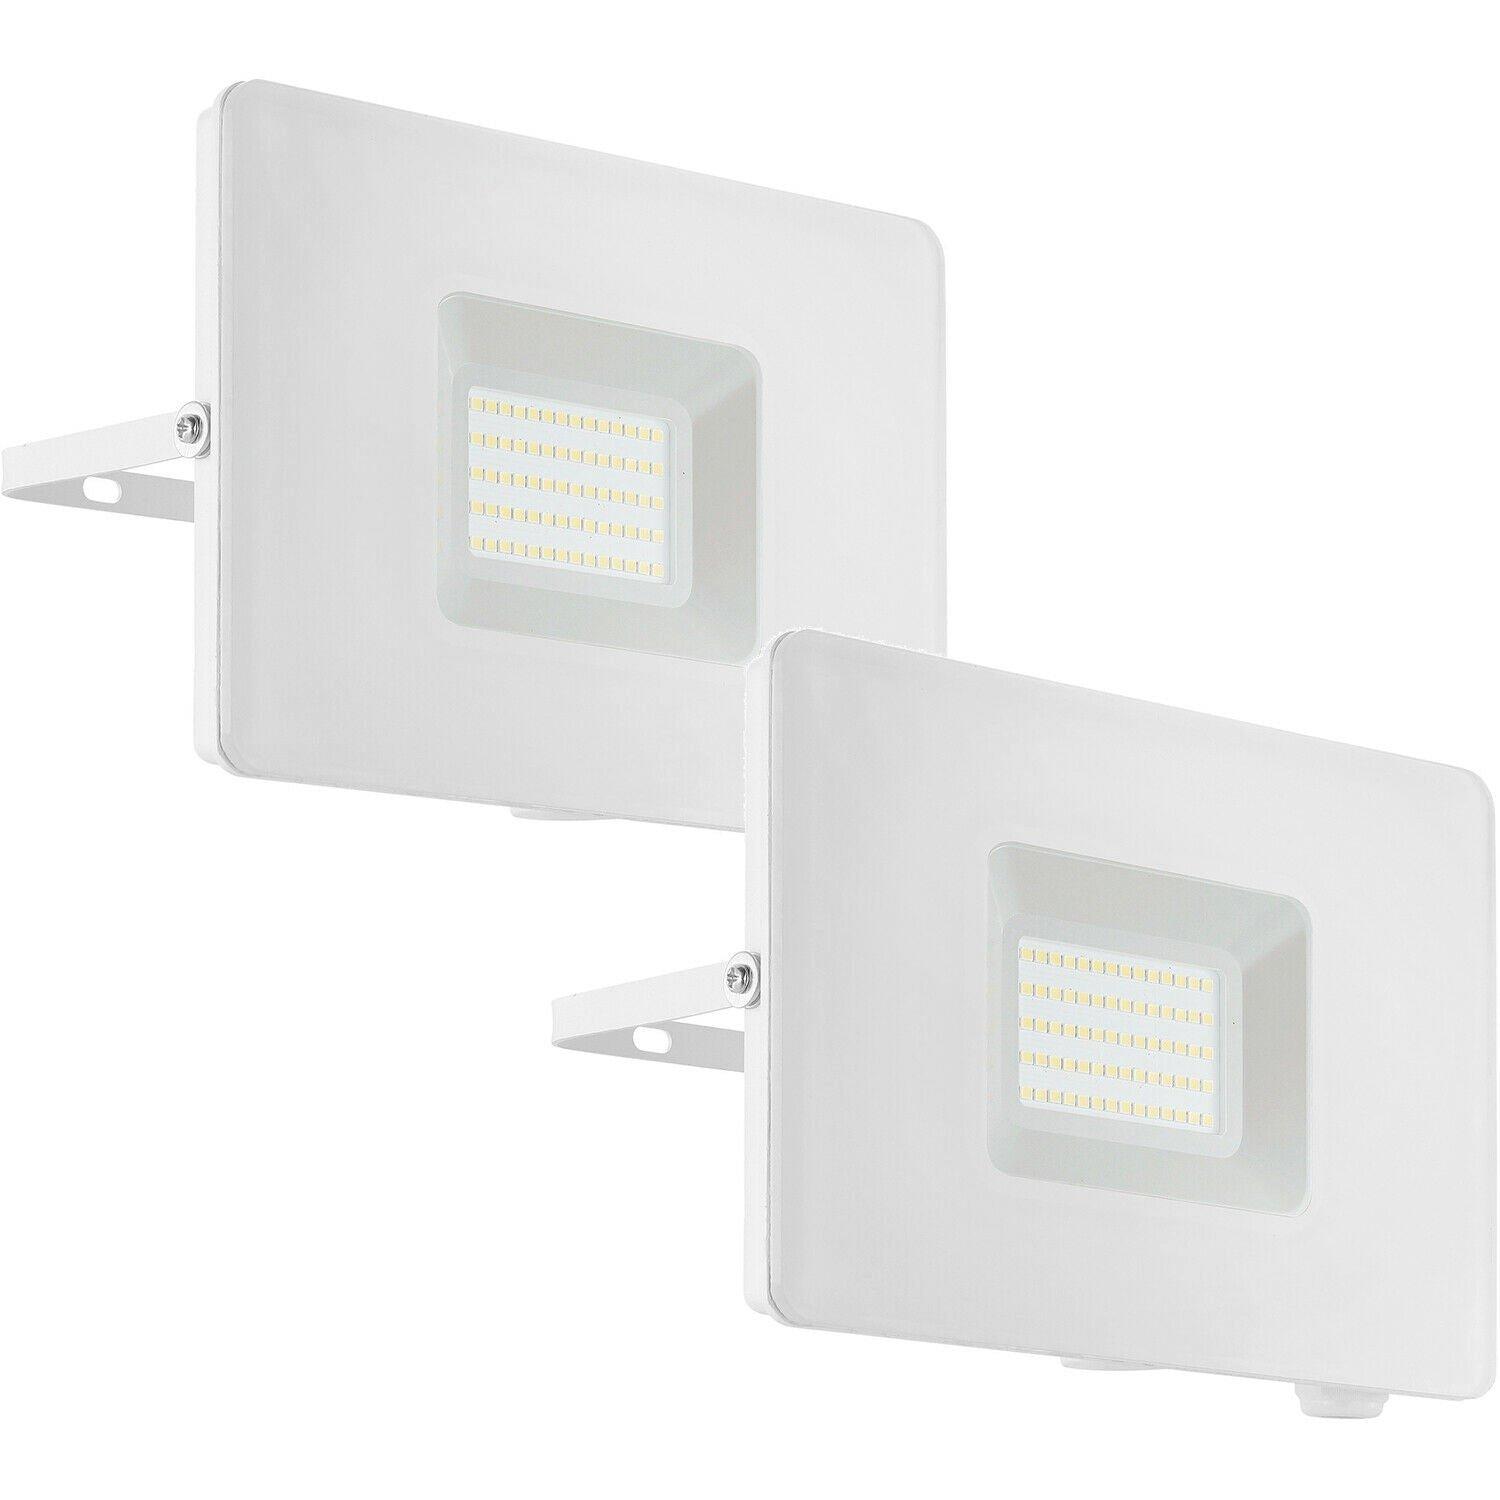 2 PACK IP65 Outdoor Wall Flood Light White Adjustable 50W LED Porch Lamp